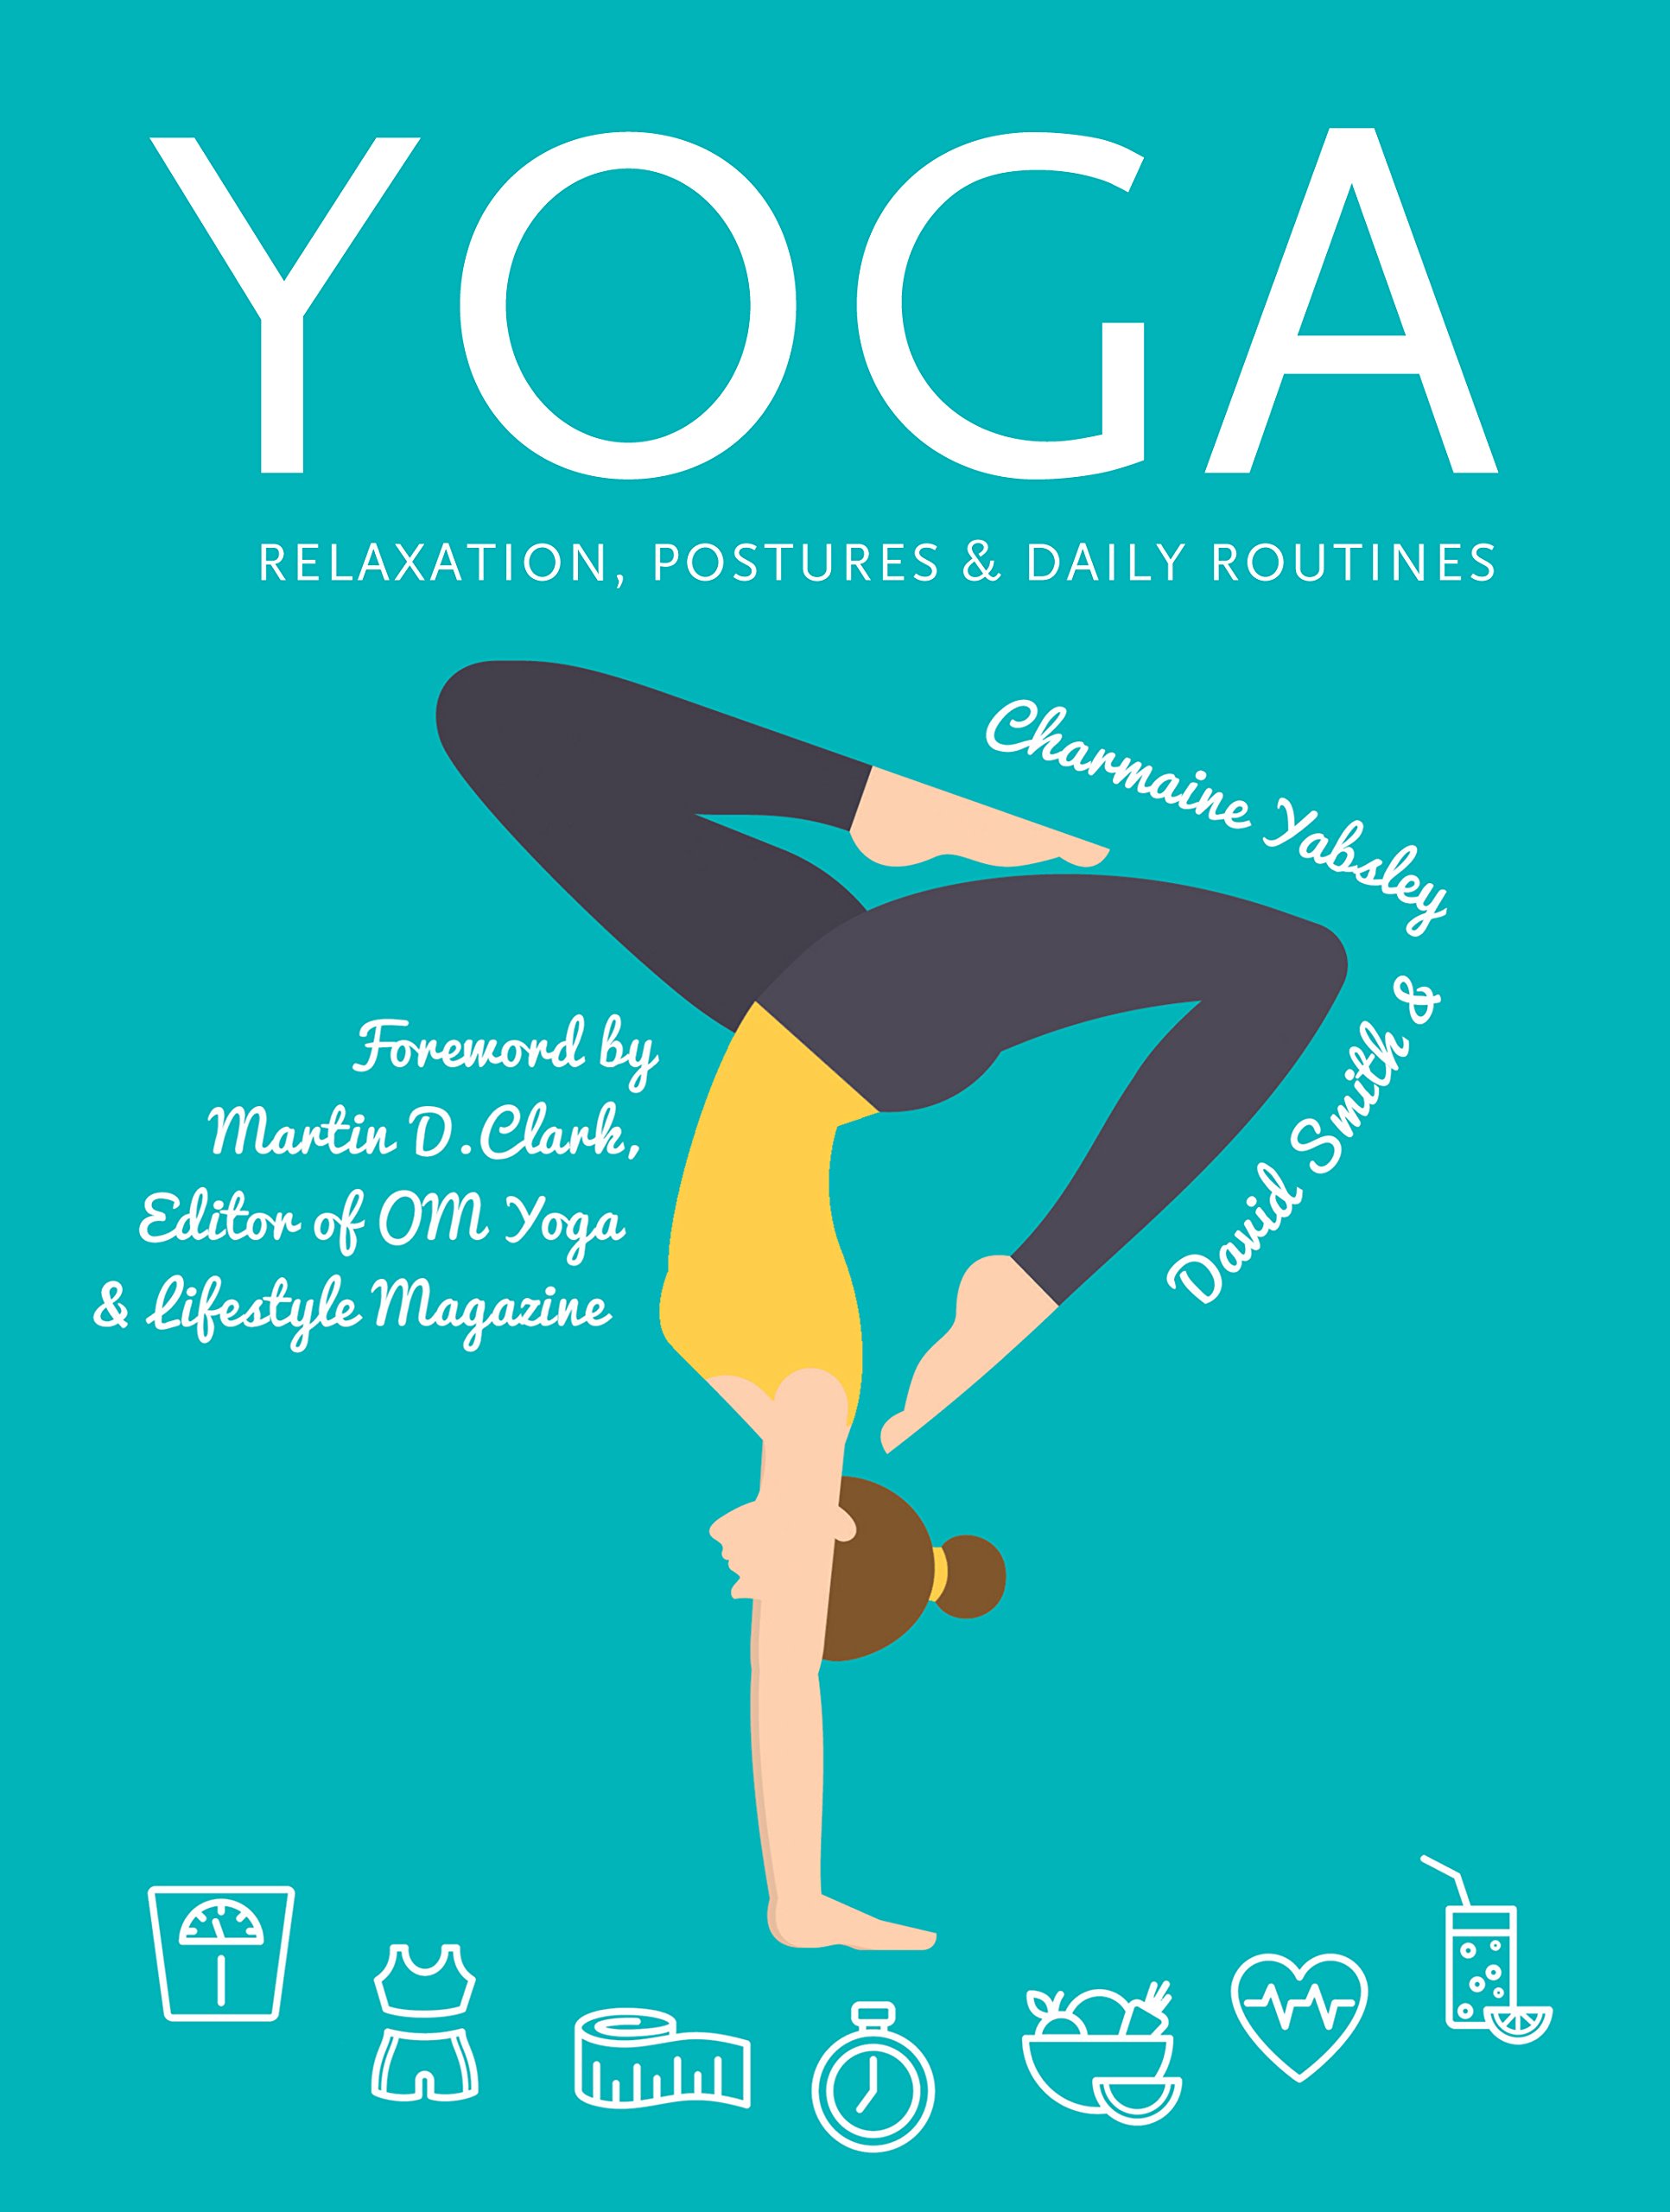 Yoga: Relaxation, Postures, Daily Routines | Charmaine Yabsley, David Smith